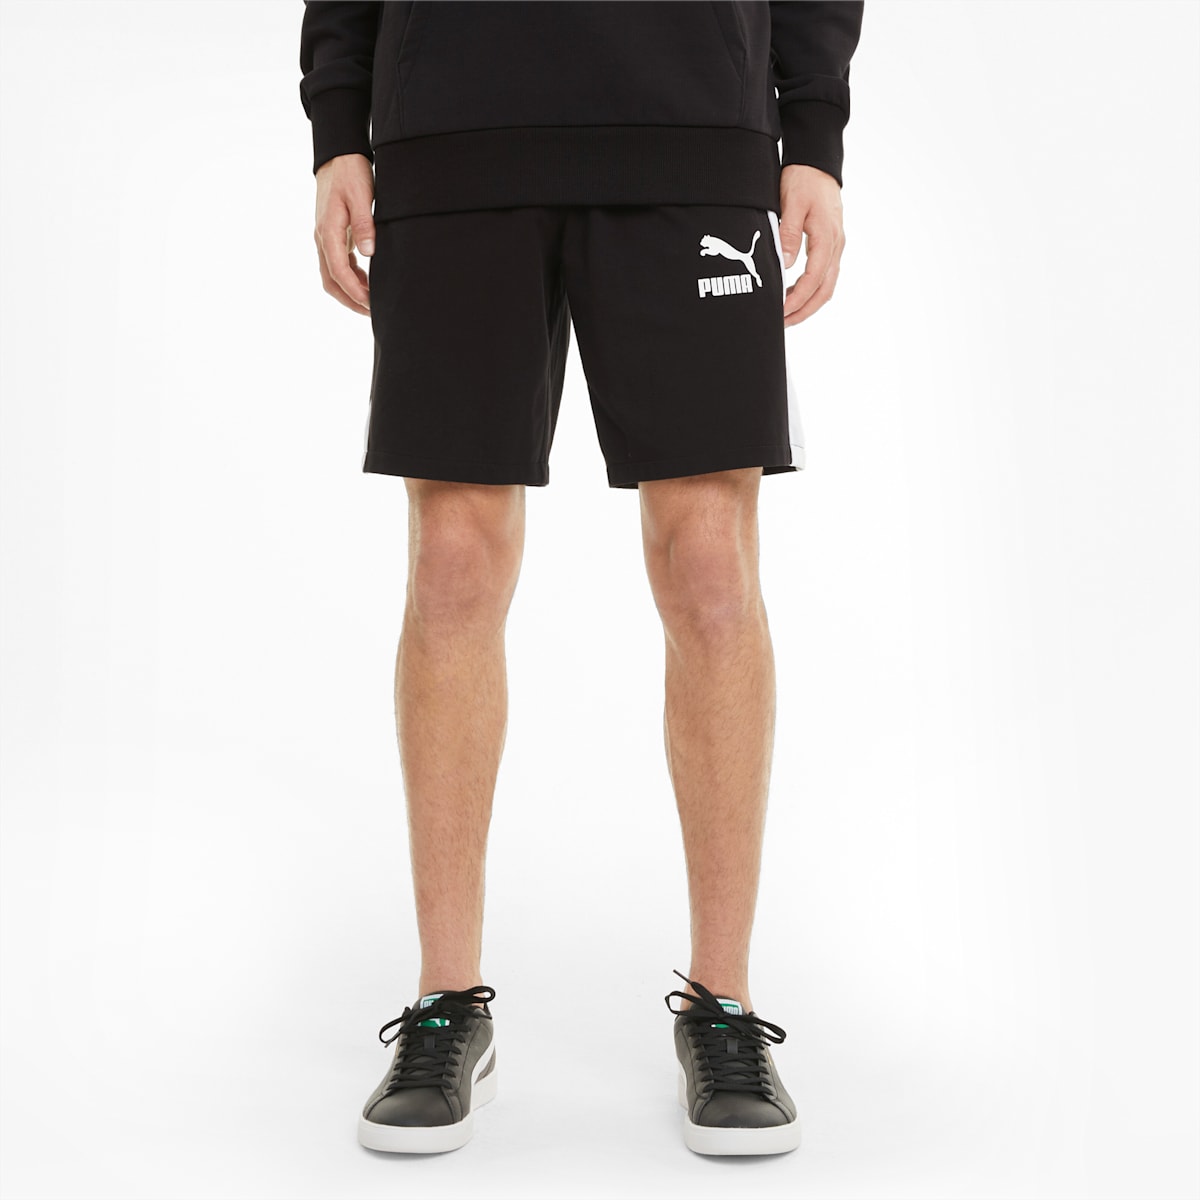 Iconic T7 Jersey 8” Men's Shorts